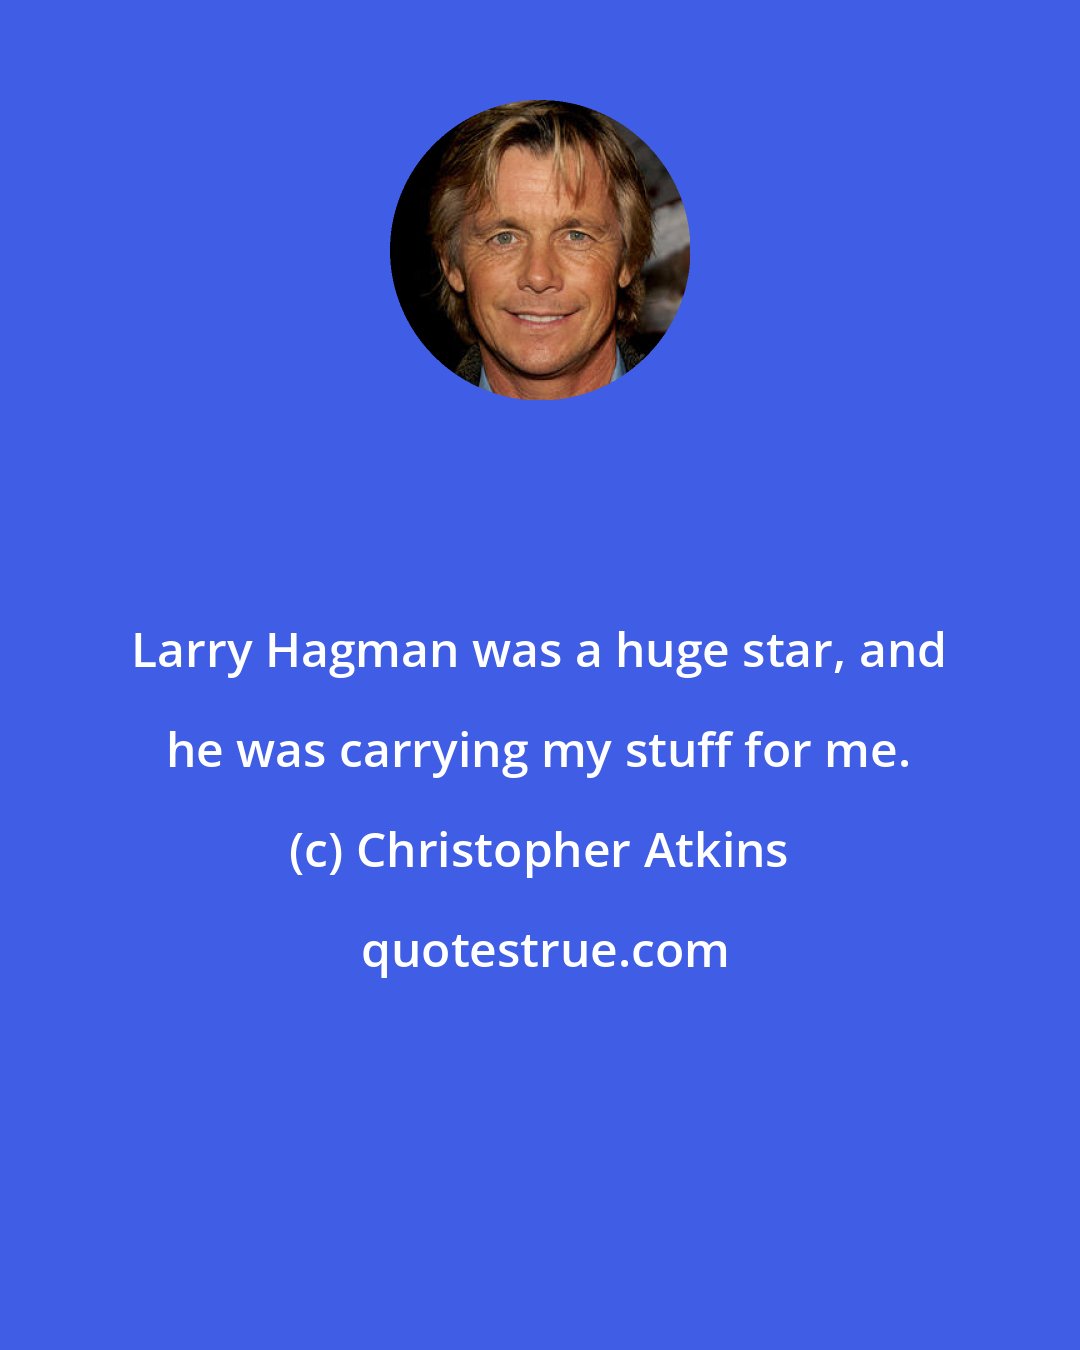 Christopher Atkins: Larry Hagman was a huge star, and he was carrying my stuff for me.